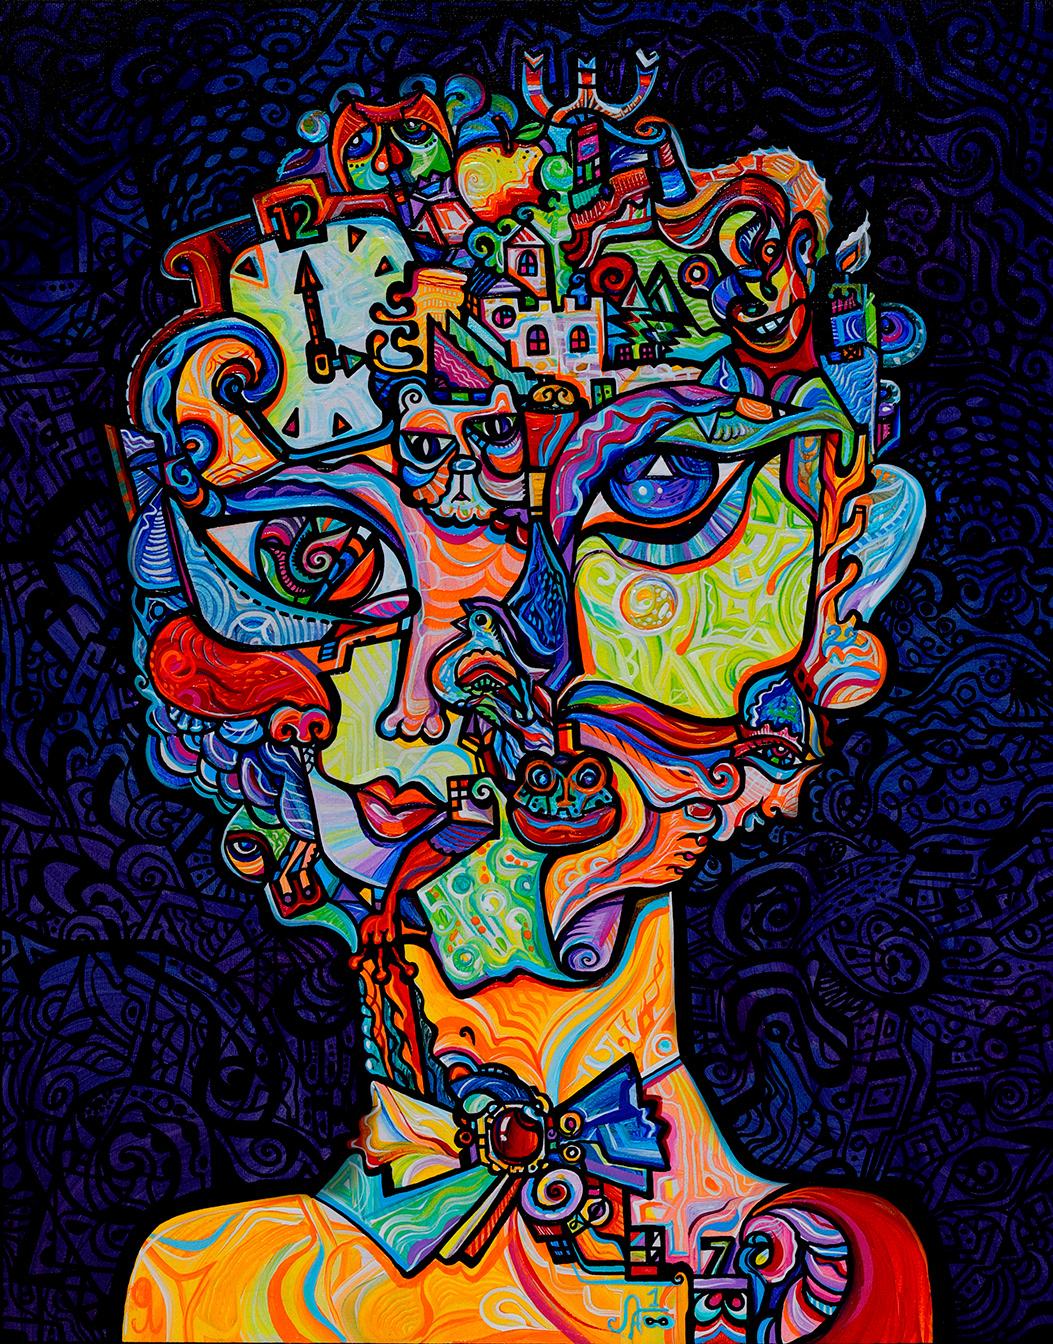 Alexander Arshansky Portrait Painting - Biomorphic Cubist Painting Titled, "Abducting Reality"